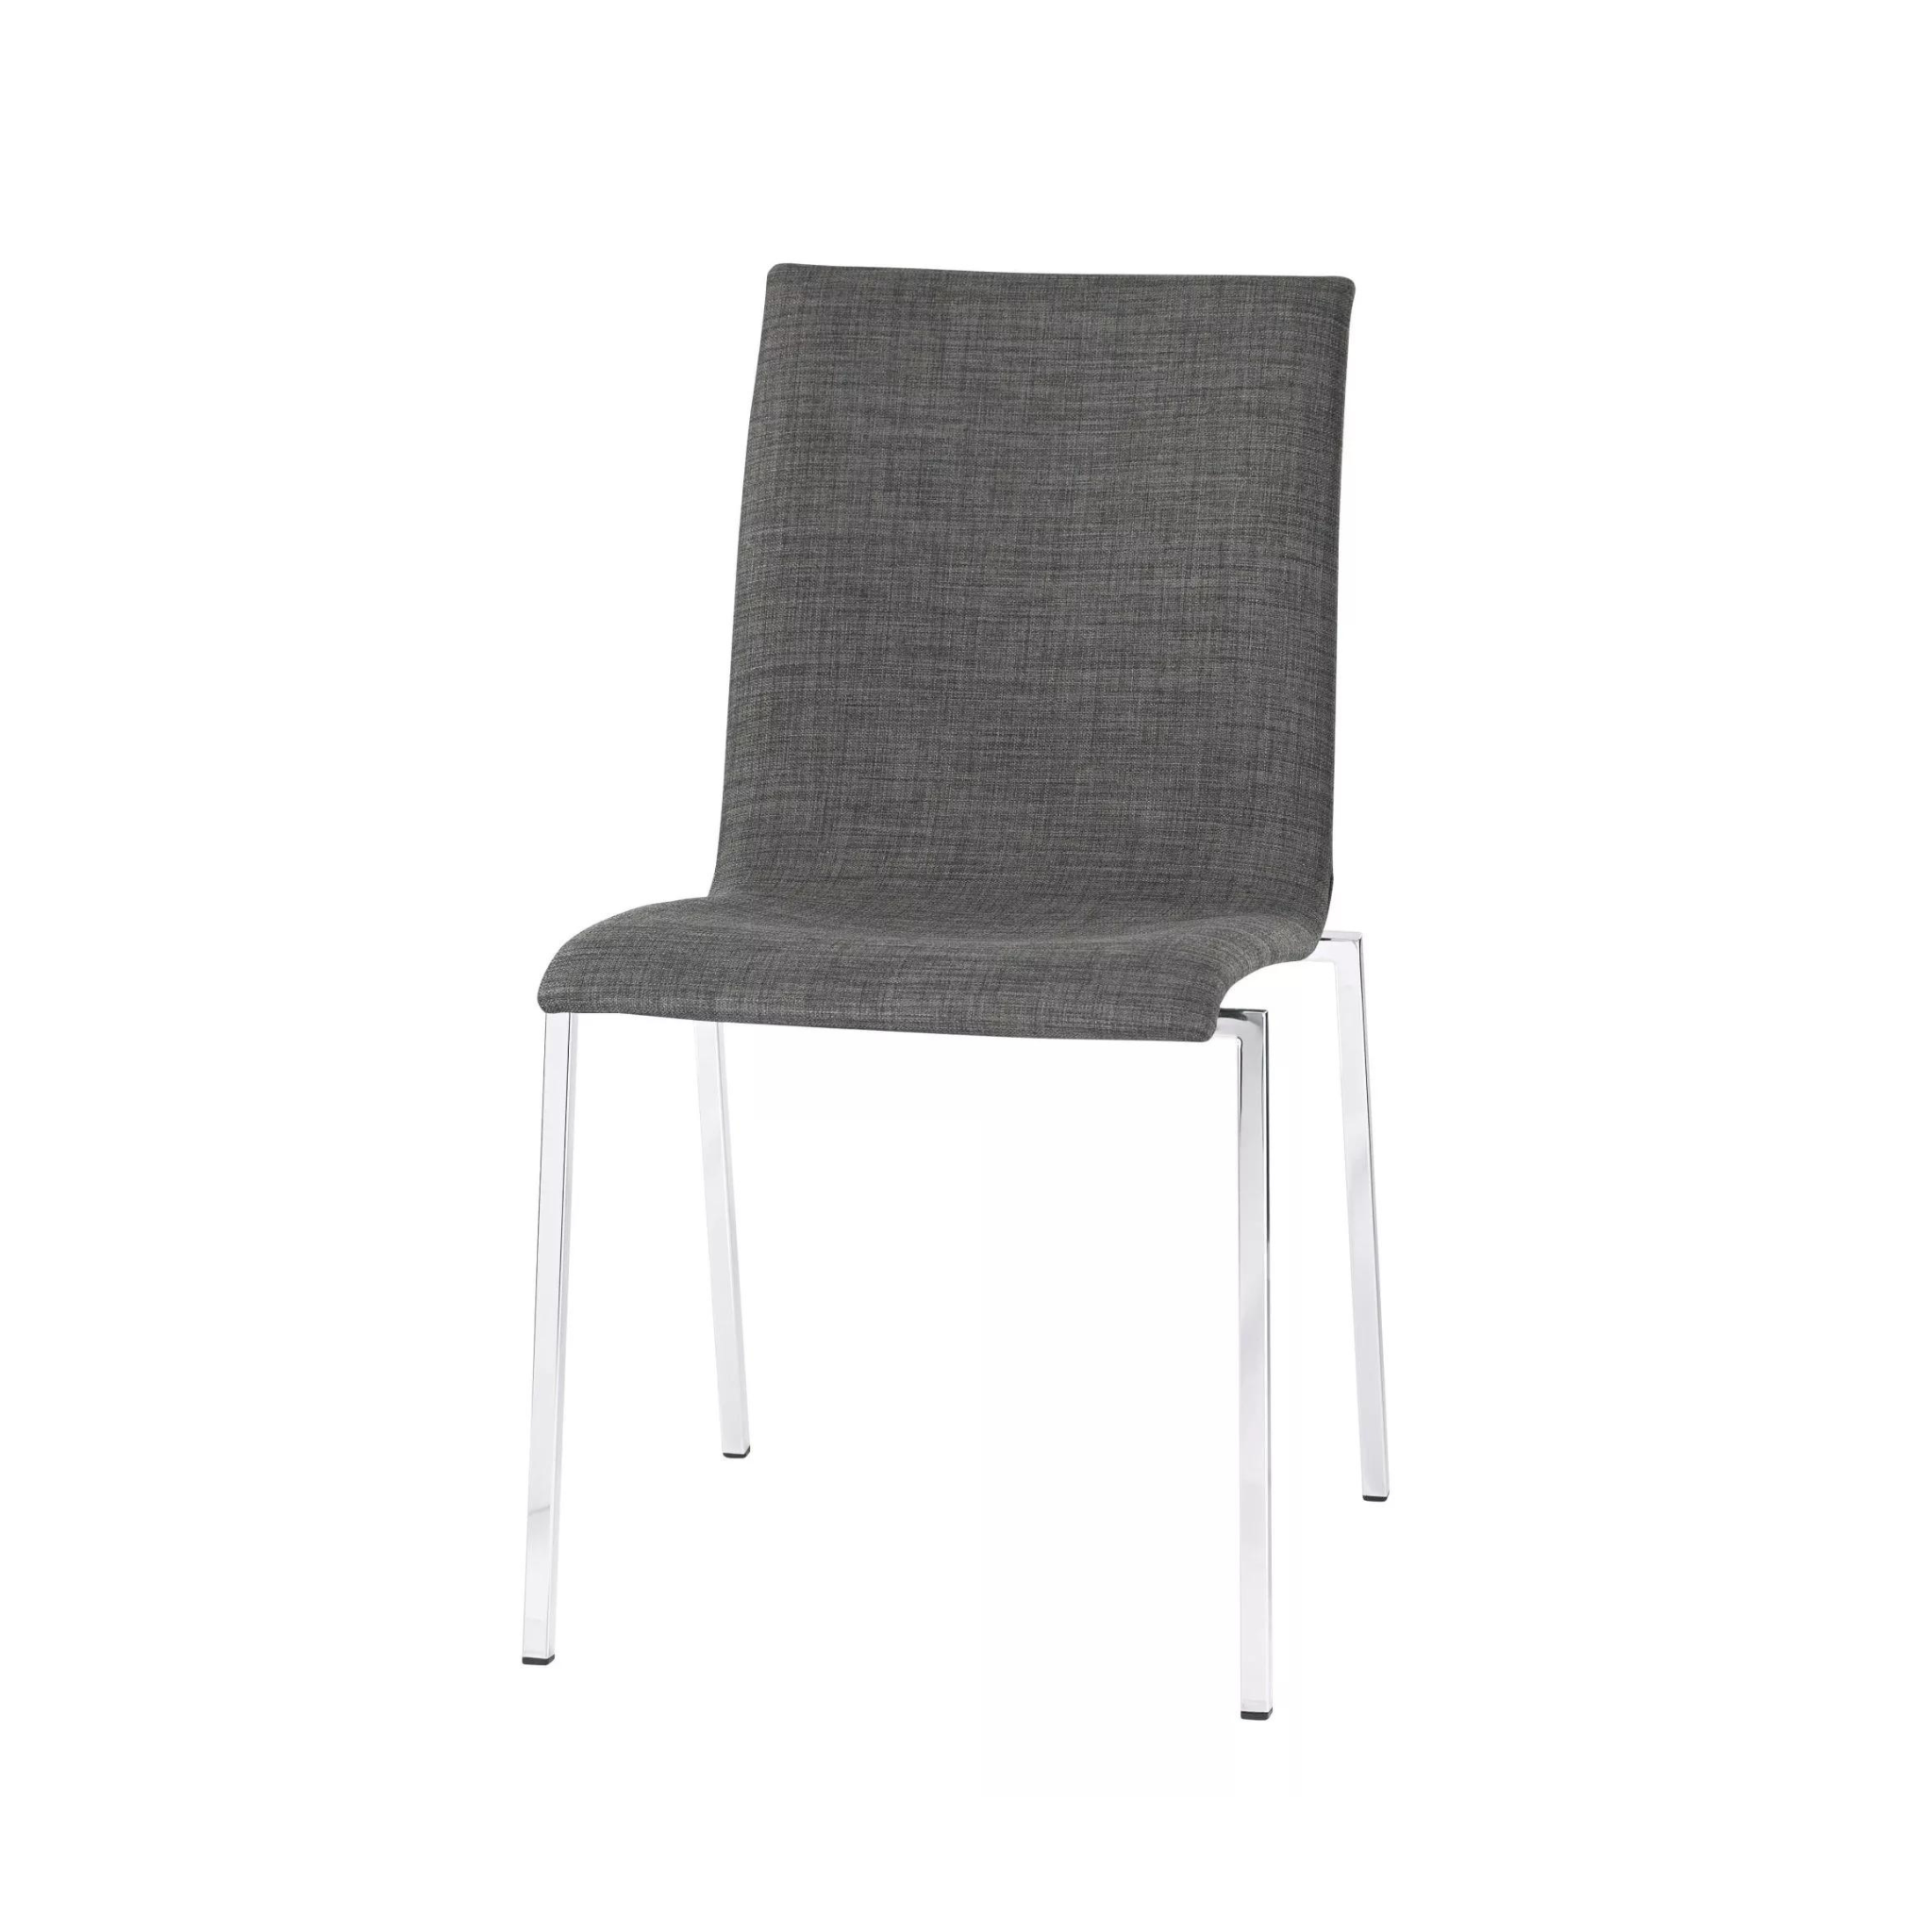 Lavabis stacking chair Upholstered wood without armrests